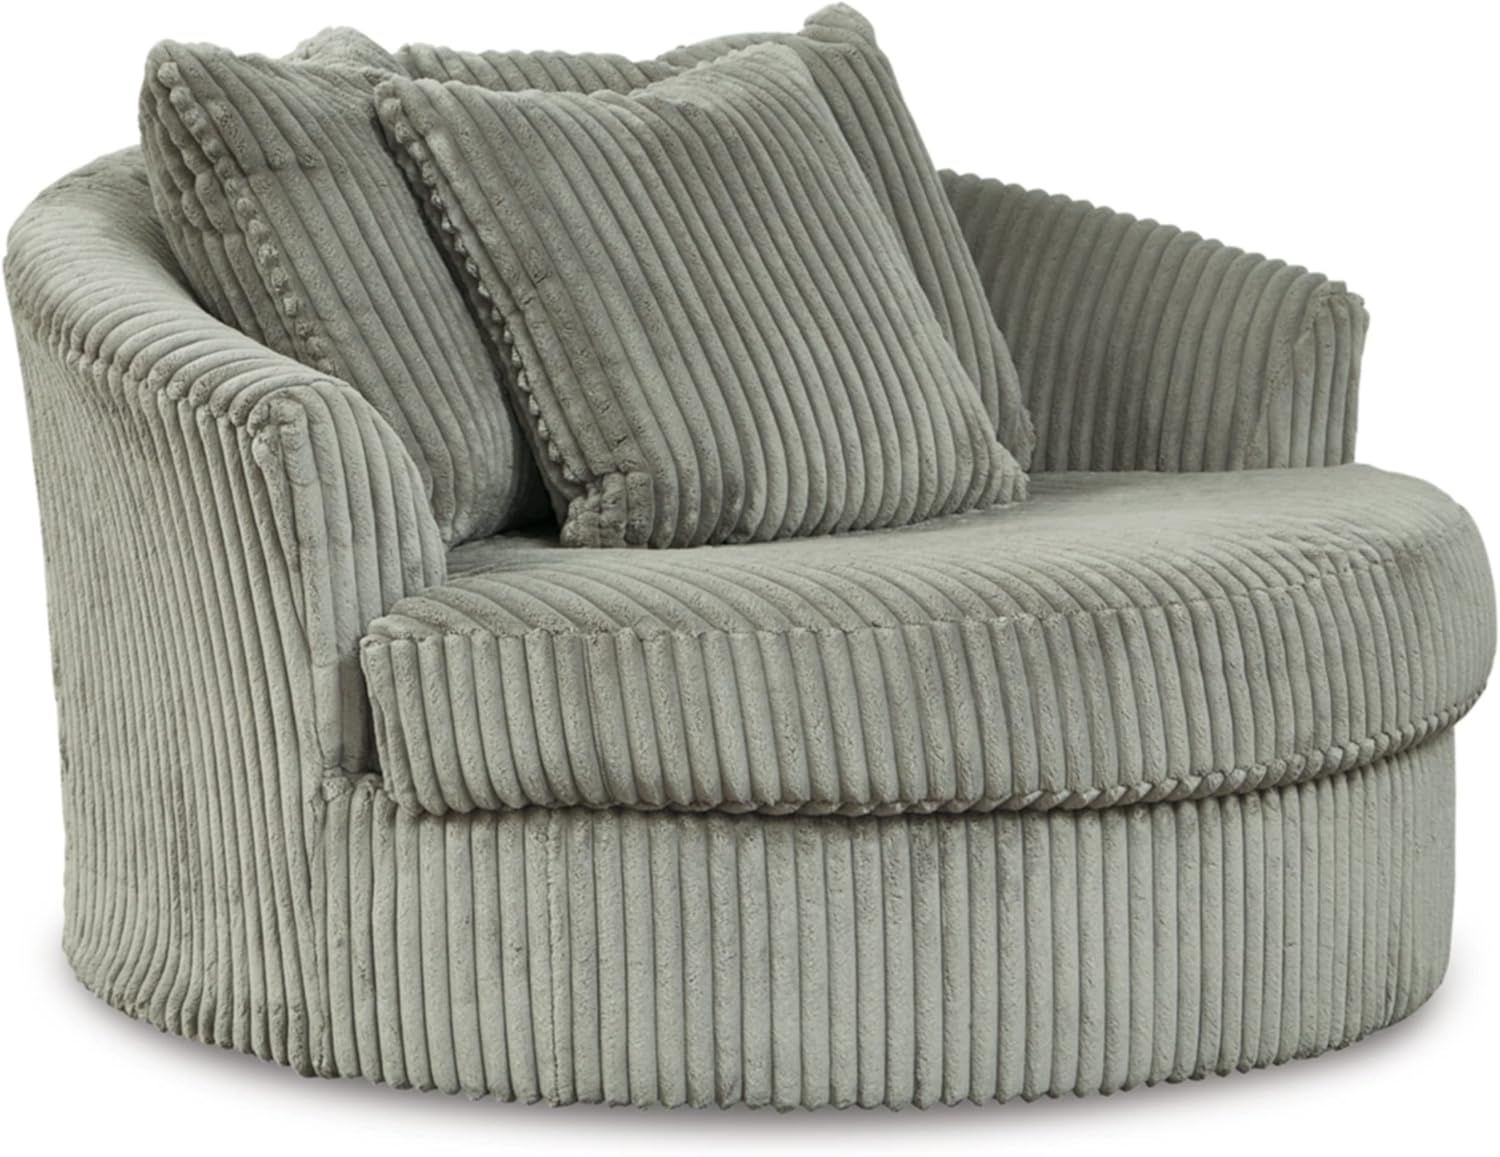 a giant round armchair with corded fabric in light gray